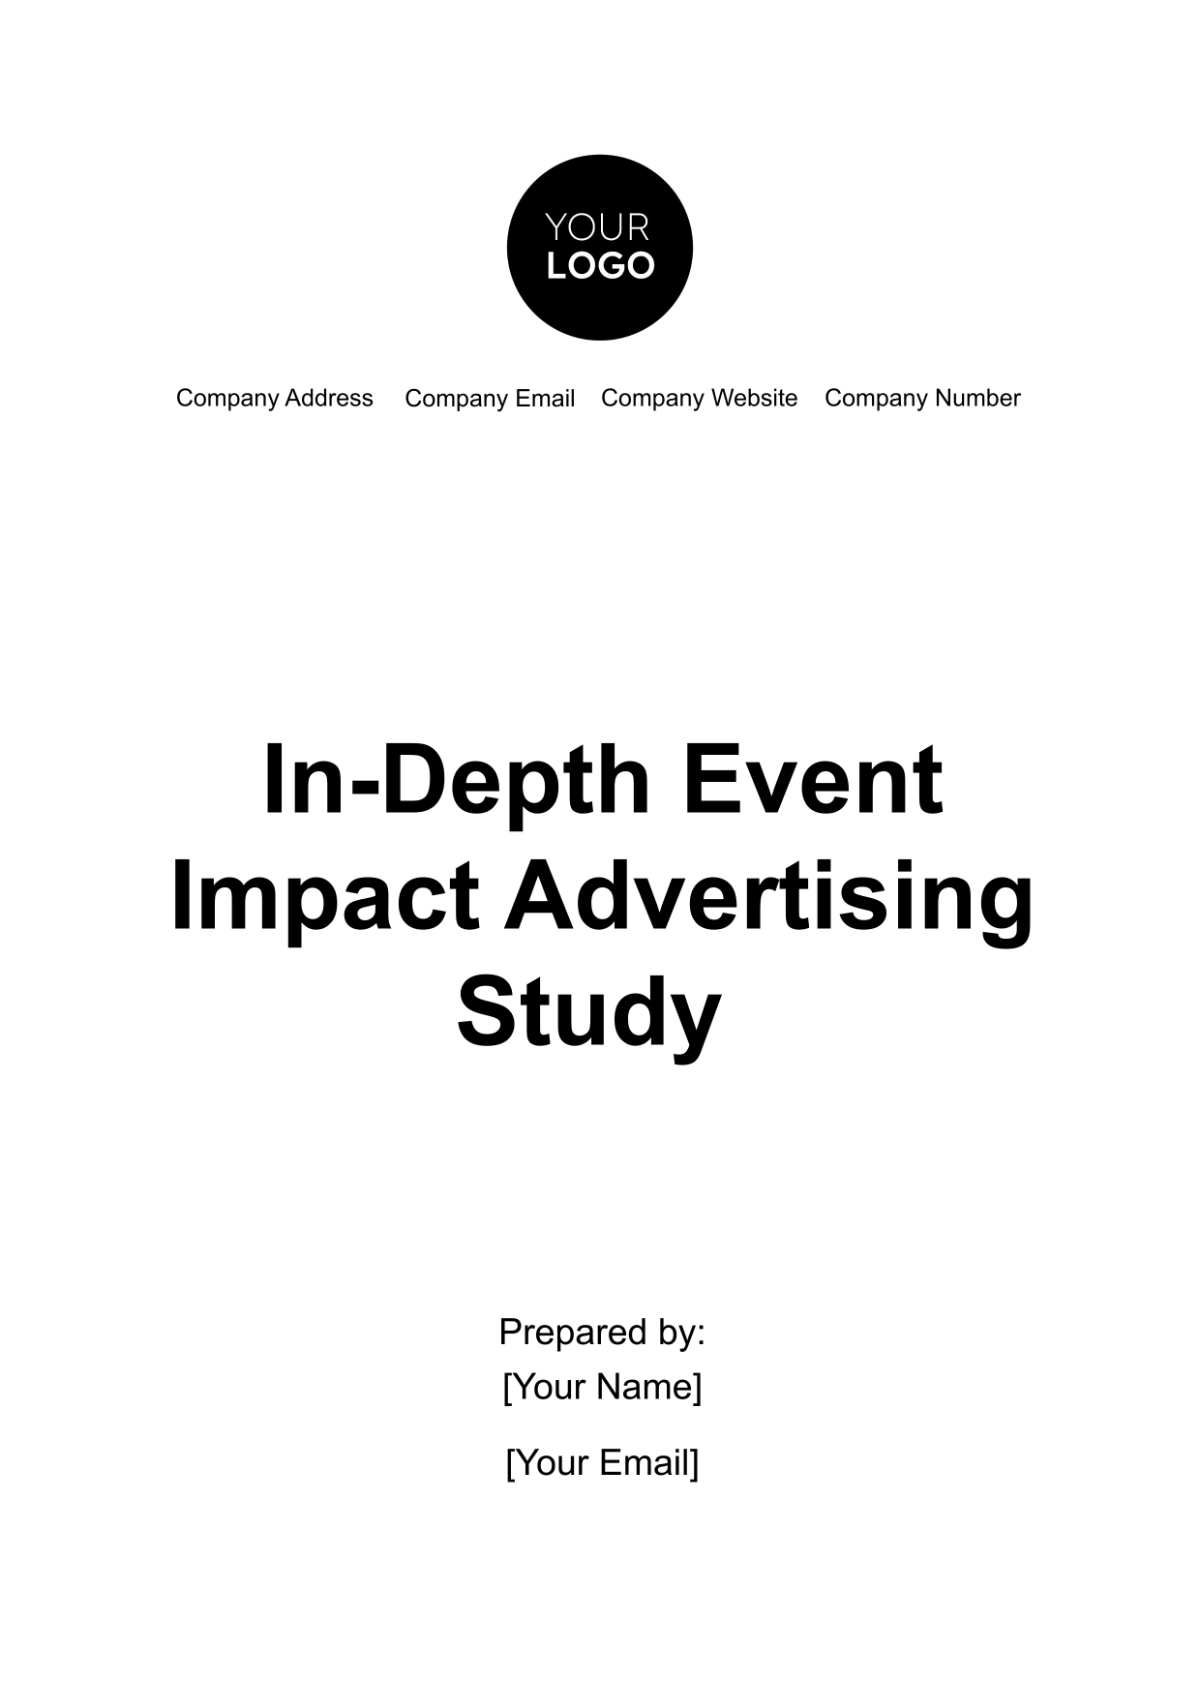 In-Depth Event Impact Advertising Study Template